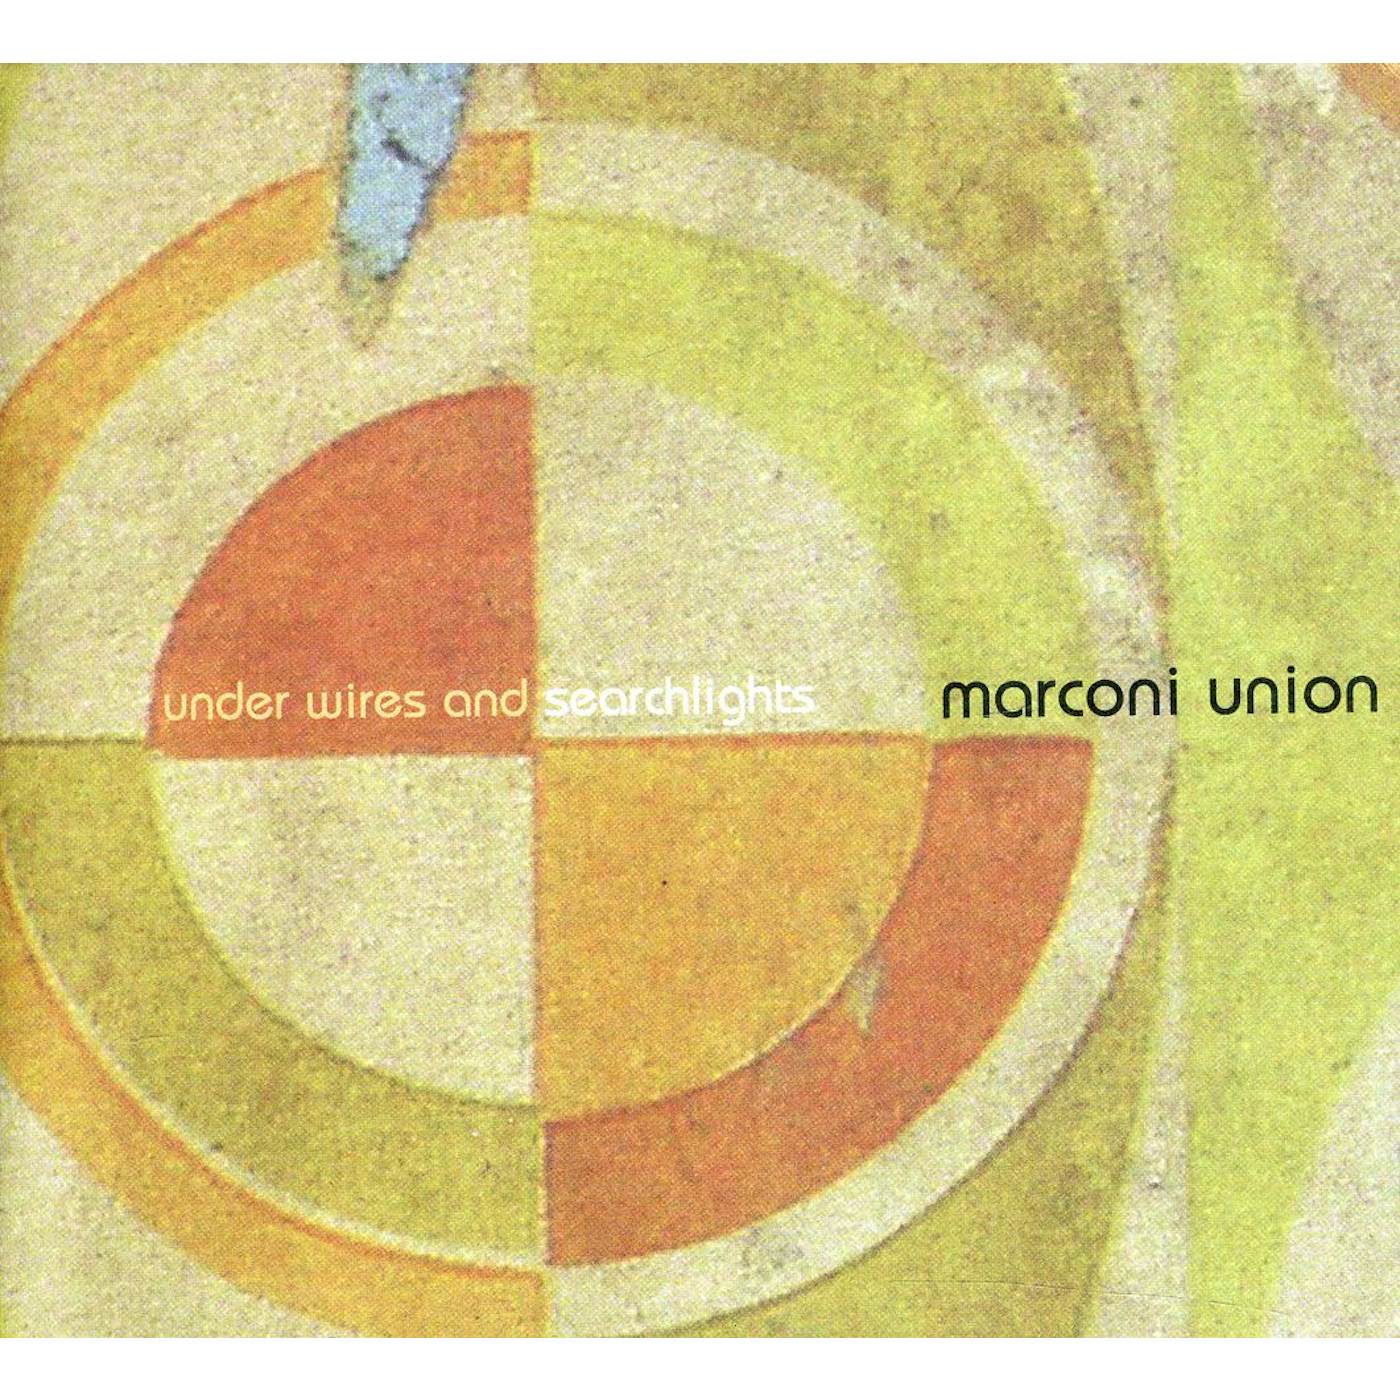 Marconi Union UNDER WIRES AND SEARCHLIGHTS CD